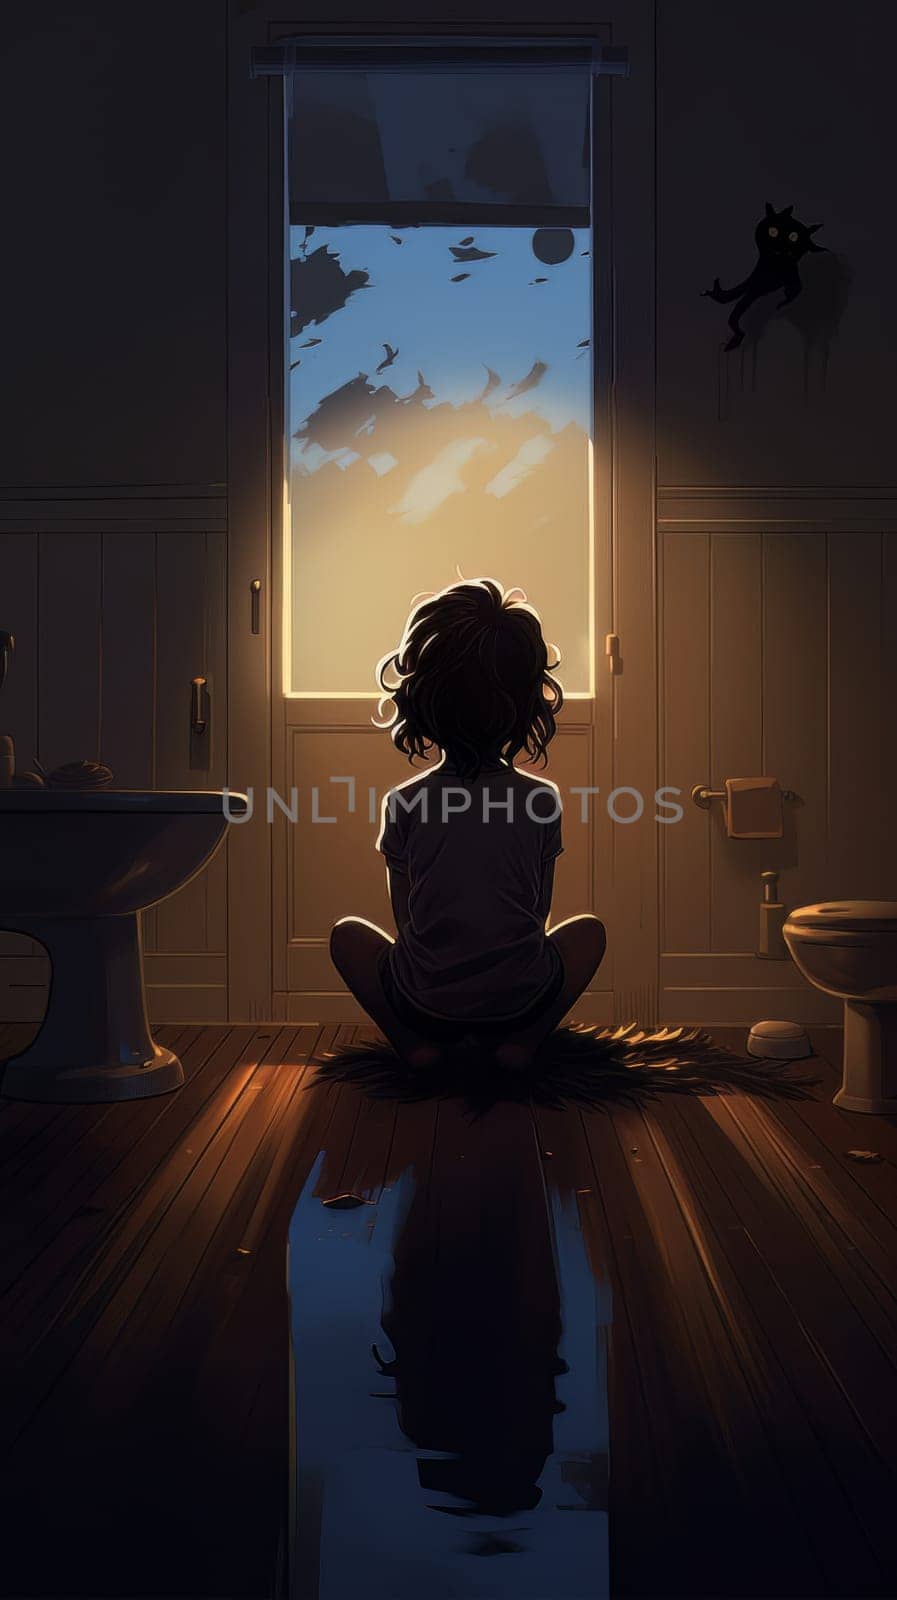 Child girl sitting on the floor in a room in front of a closed door AI by but_photo